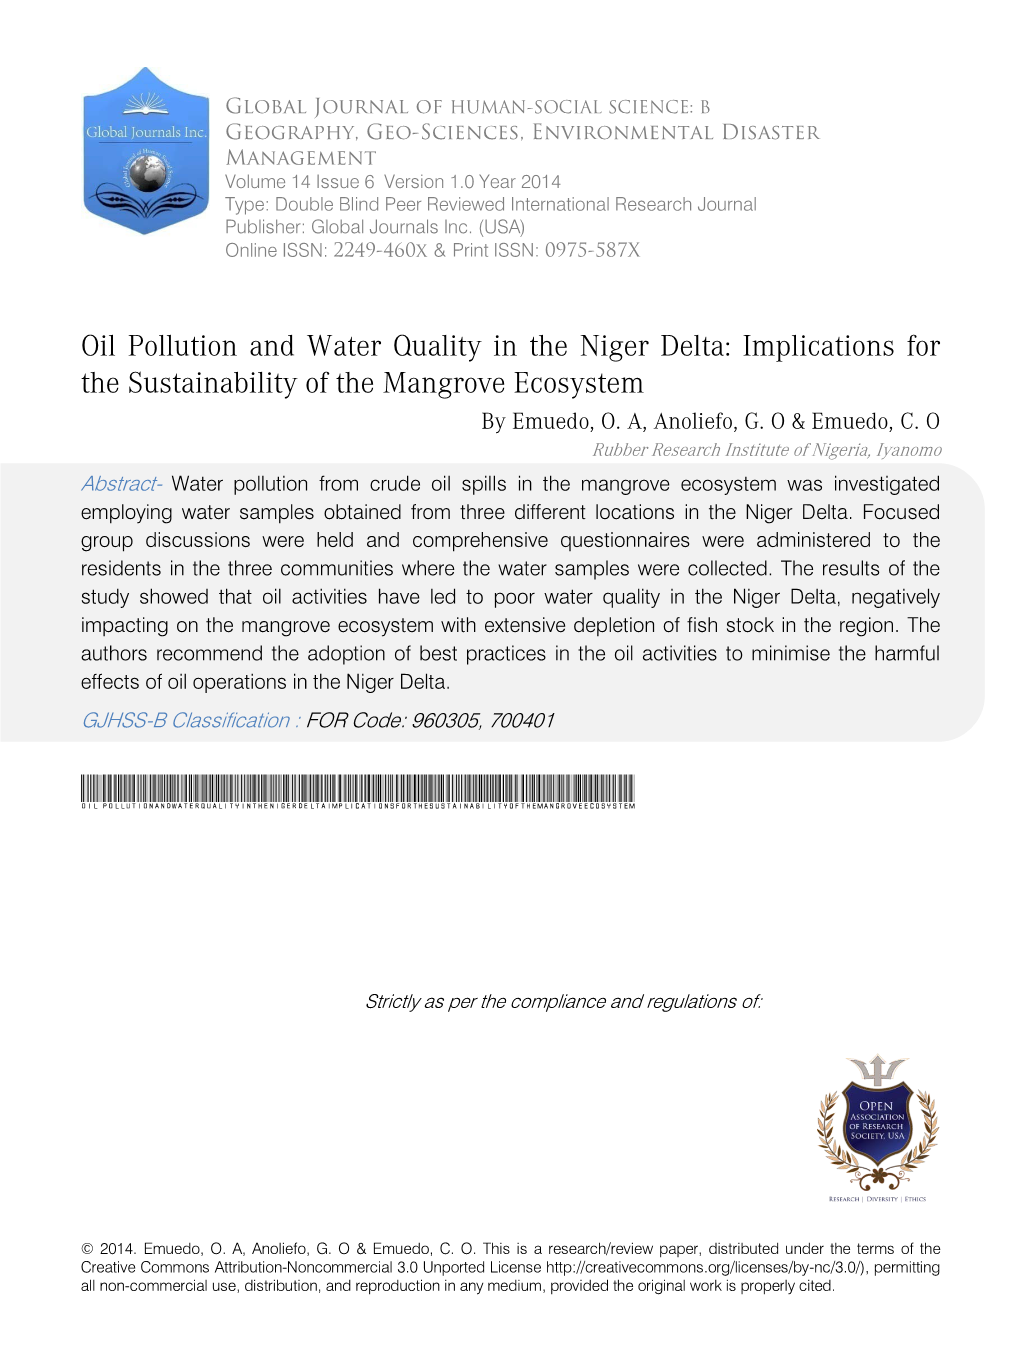 Oil Pollution and Water Quality in the Niger Delta: Implications for the Sustainability of the Mangrove Ecosystem by Emuedo, O